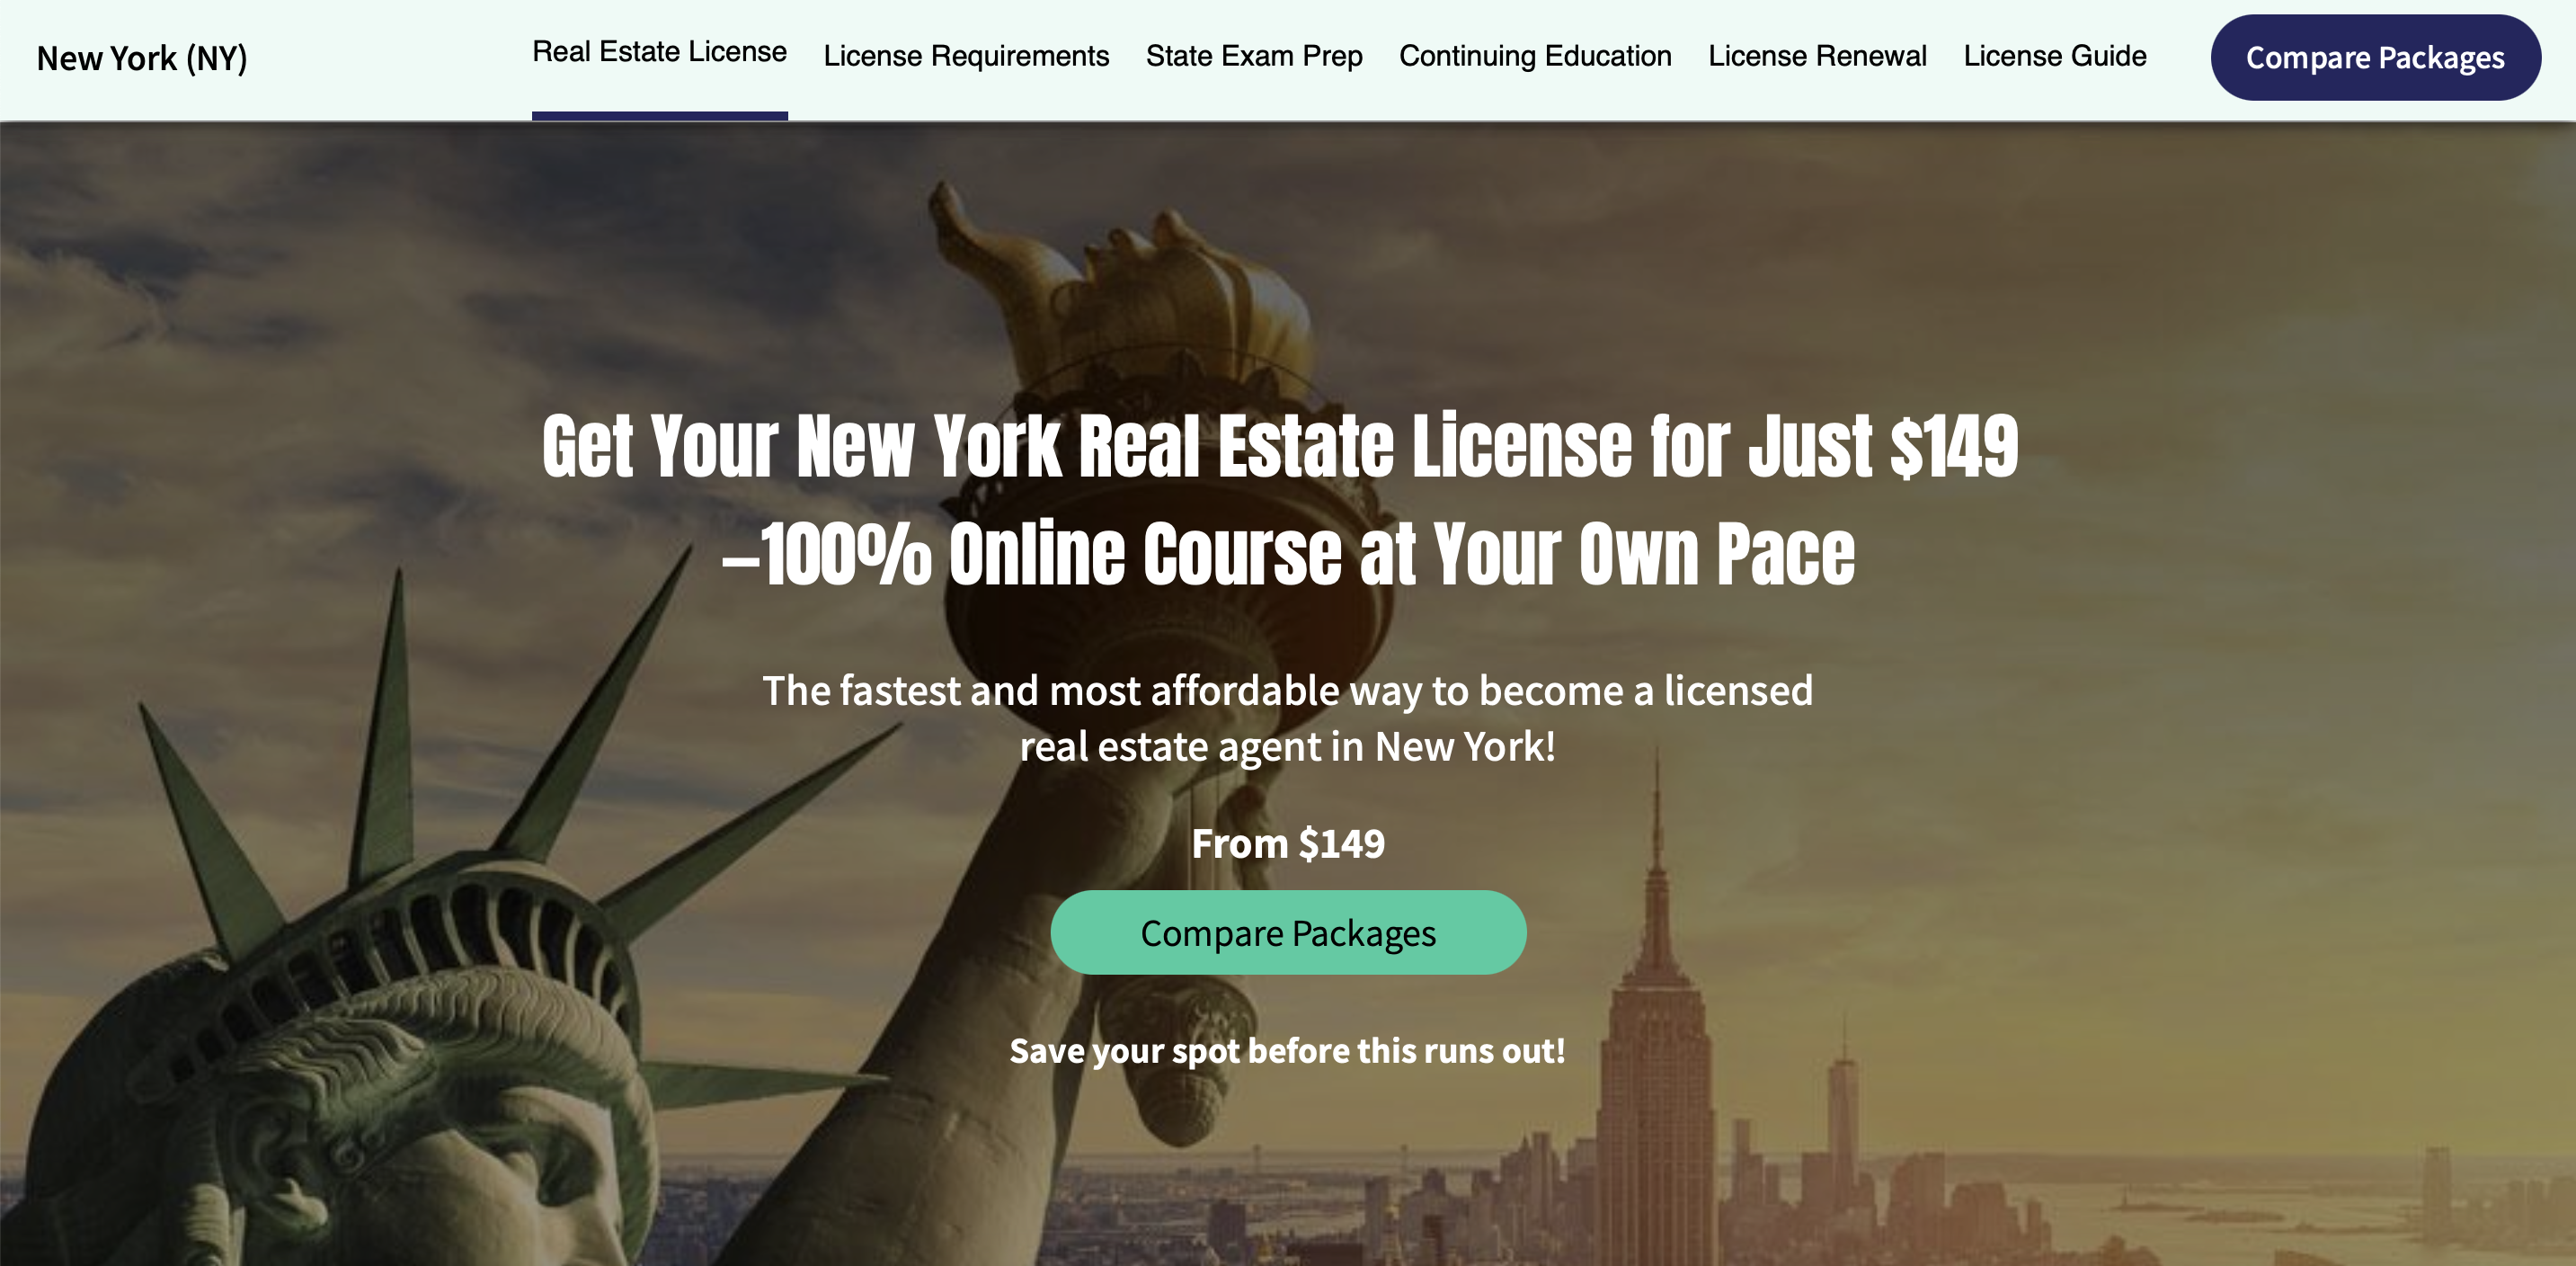 The cost for the New York Real estate license course and state exam course on RealEstateU.com